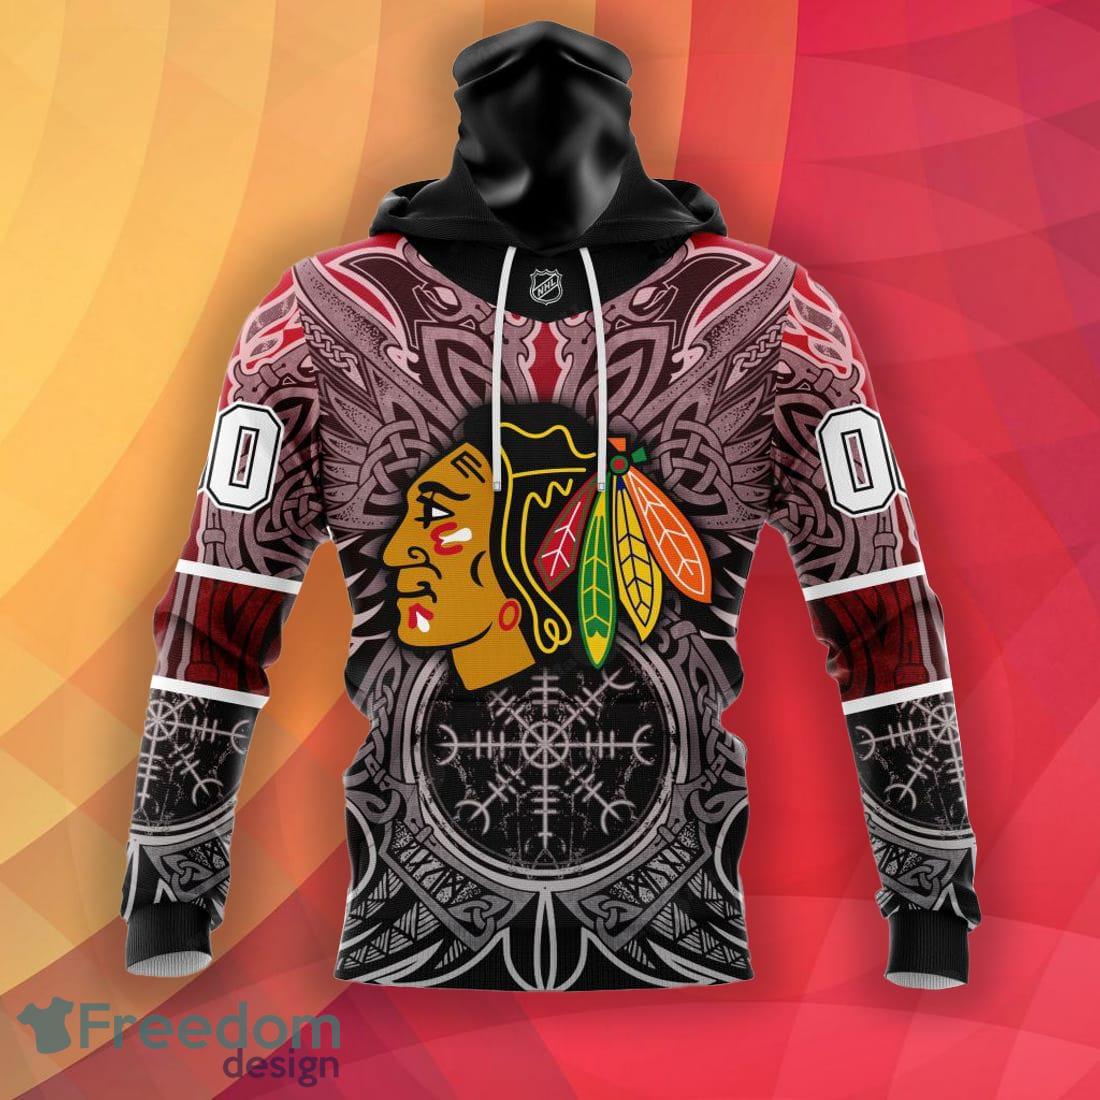 Chicago Blackhawks Youth NHL Pullover 1/4th Zip Up Jacket - Red